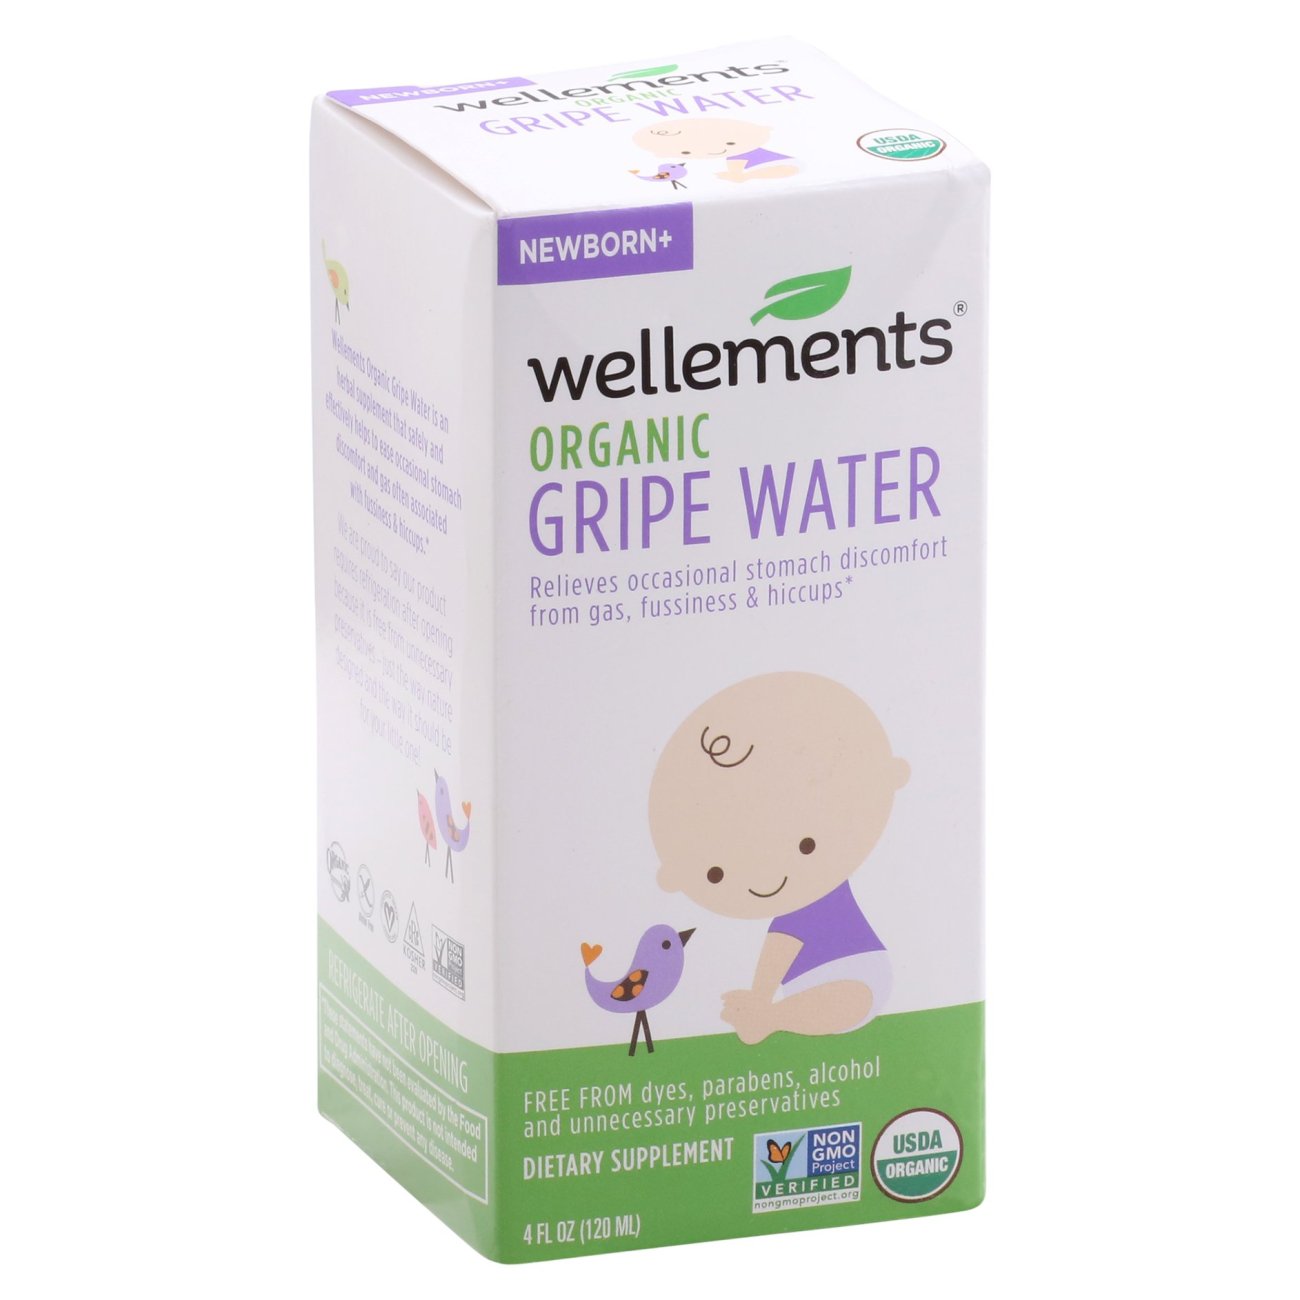 Wellements Organic Gripe Water Two-Pack